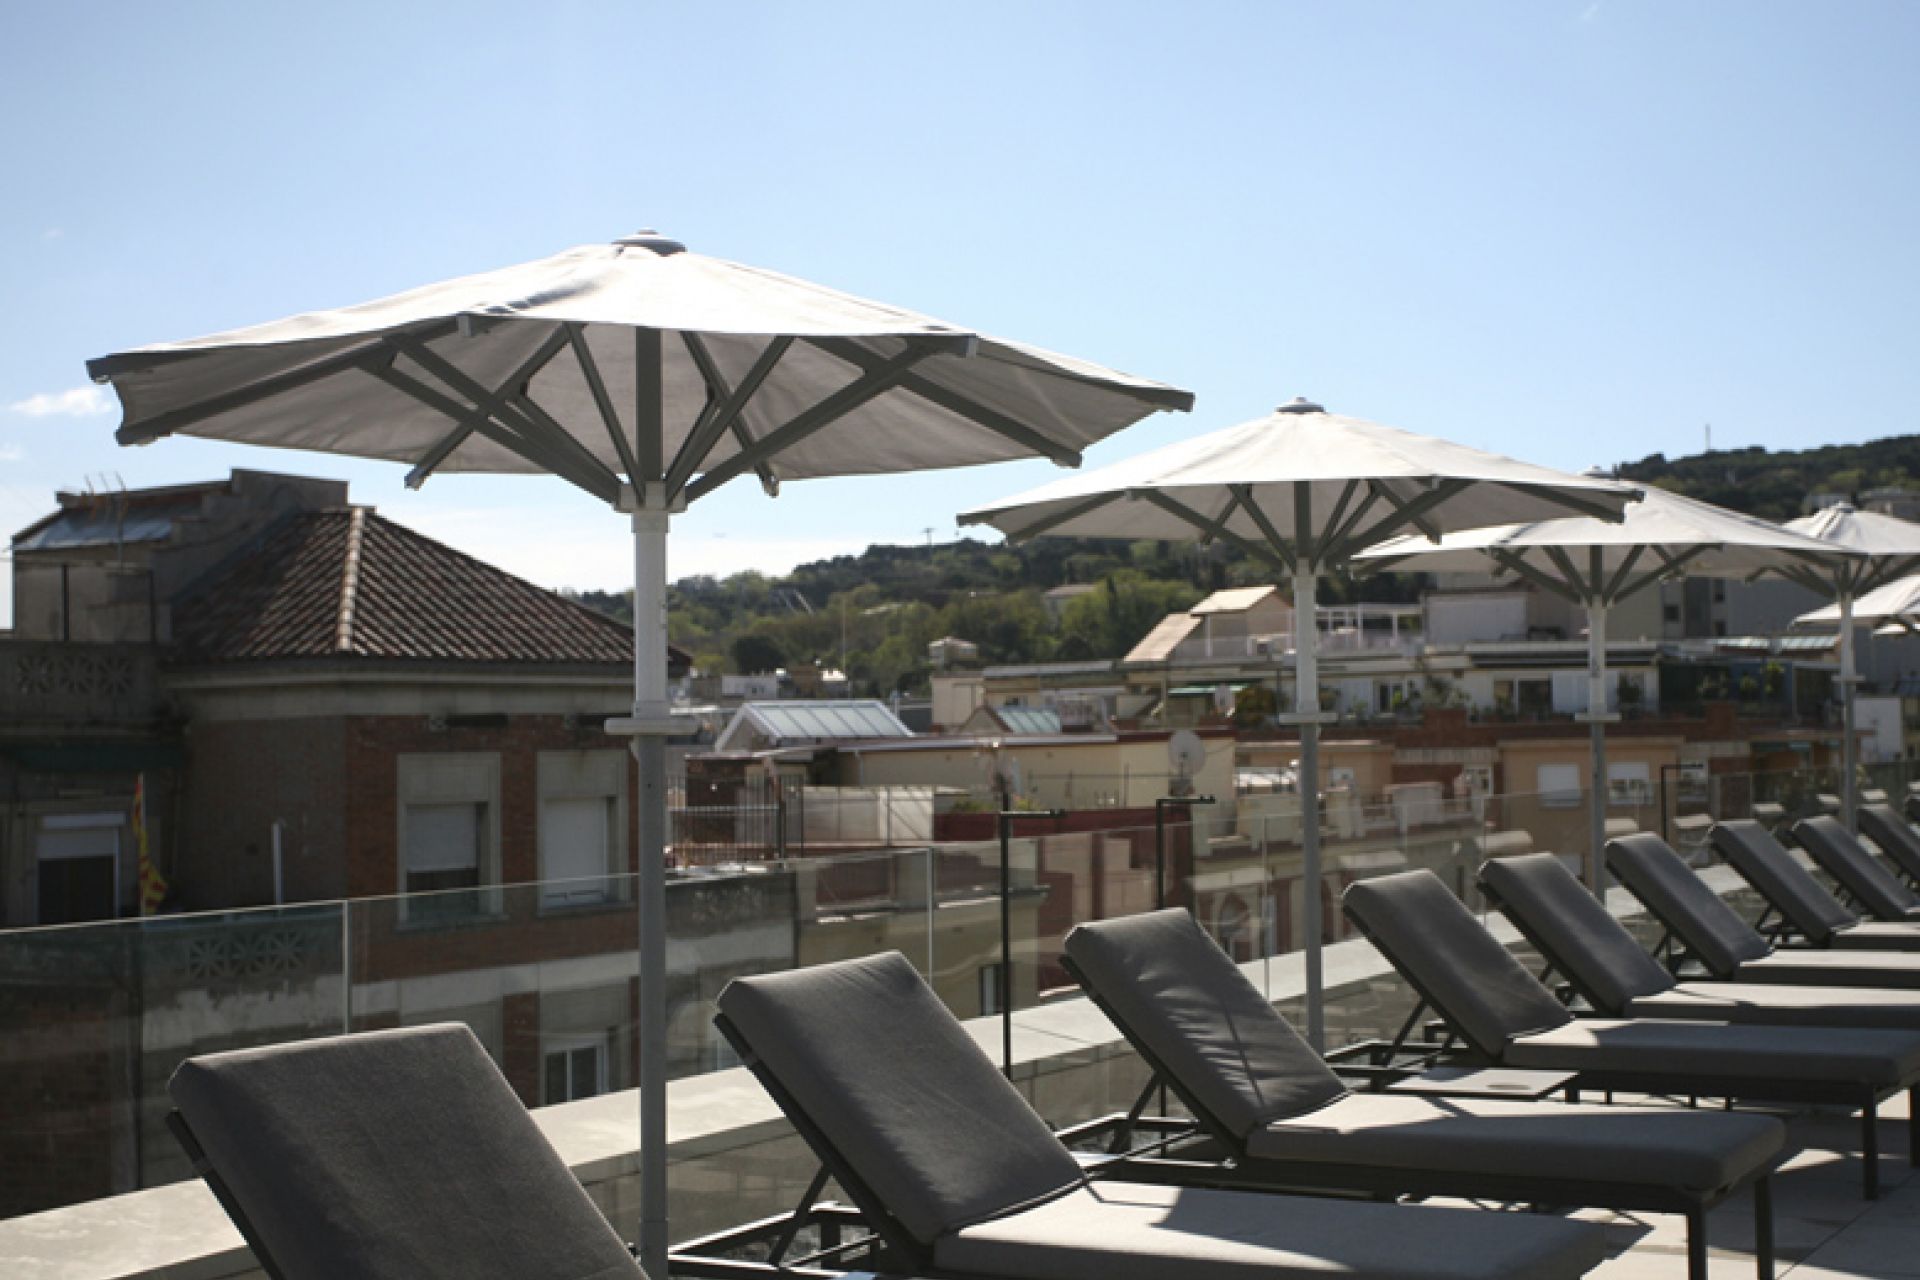 Ibiza parasols lined up on the hotel terrace